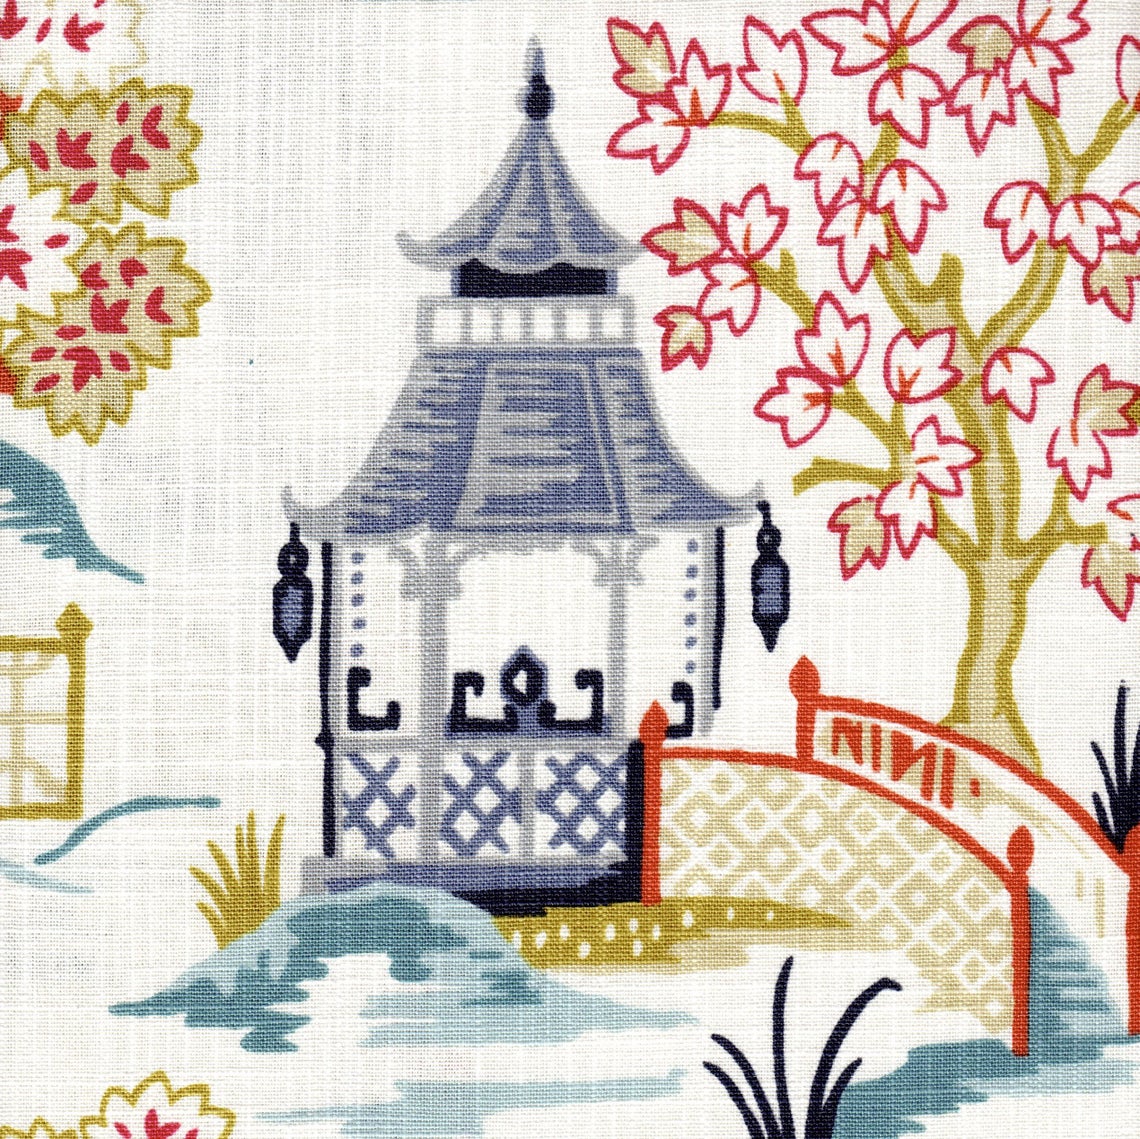 tailored bedskirt in shoji summer oriental toile, multicolor chinoiserie